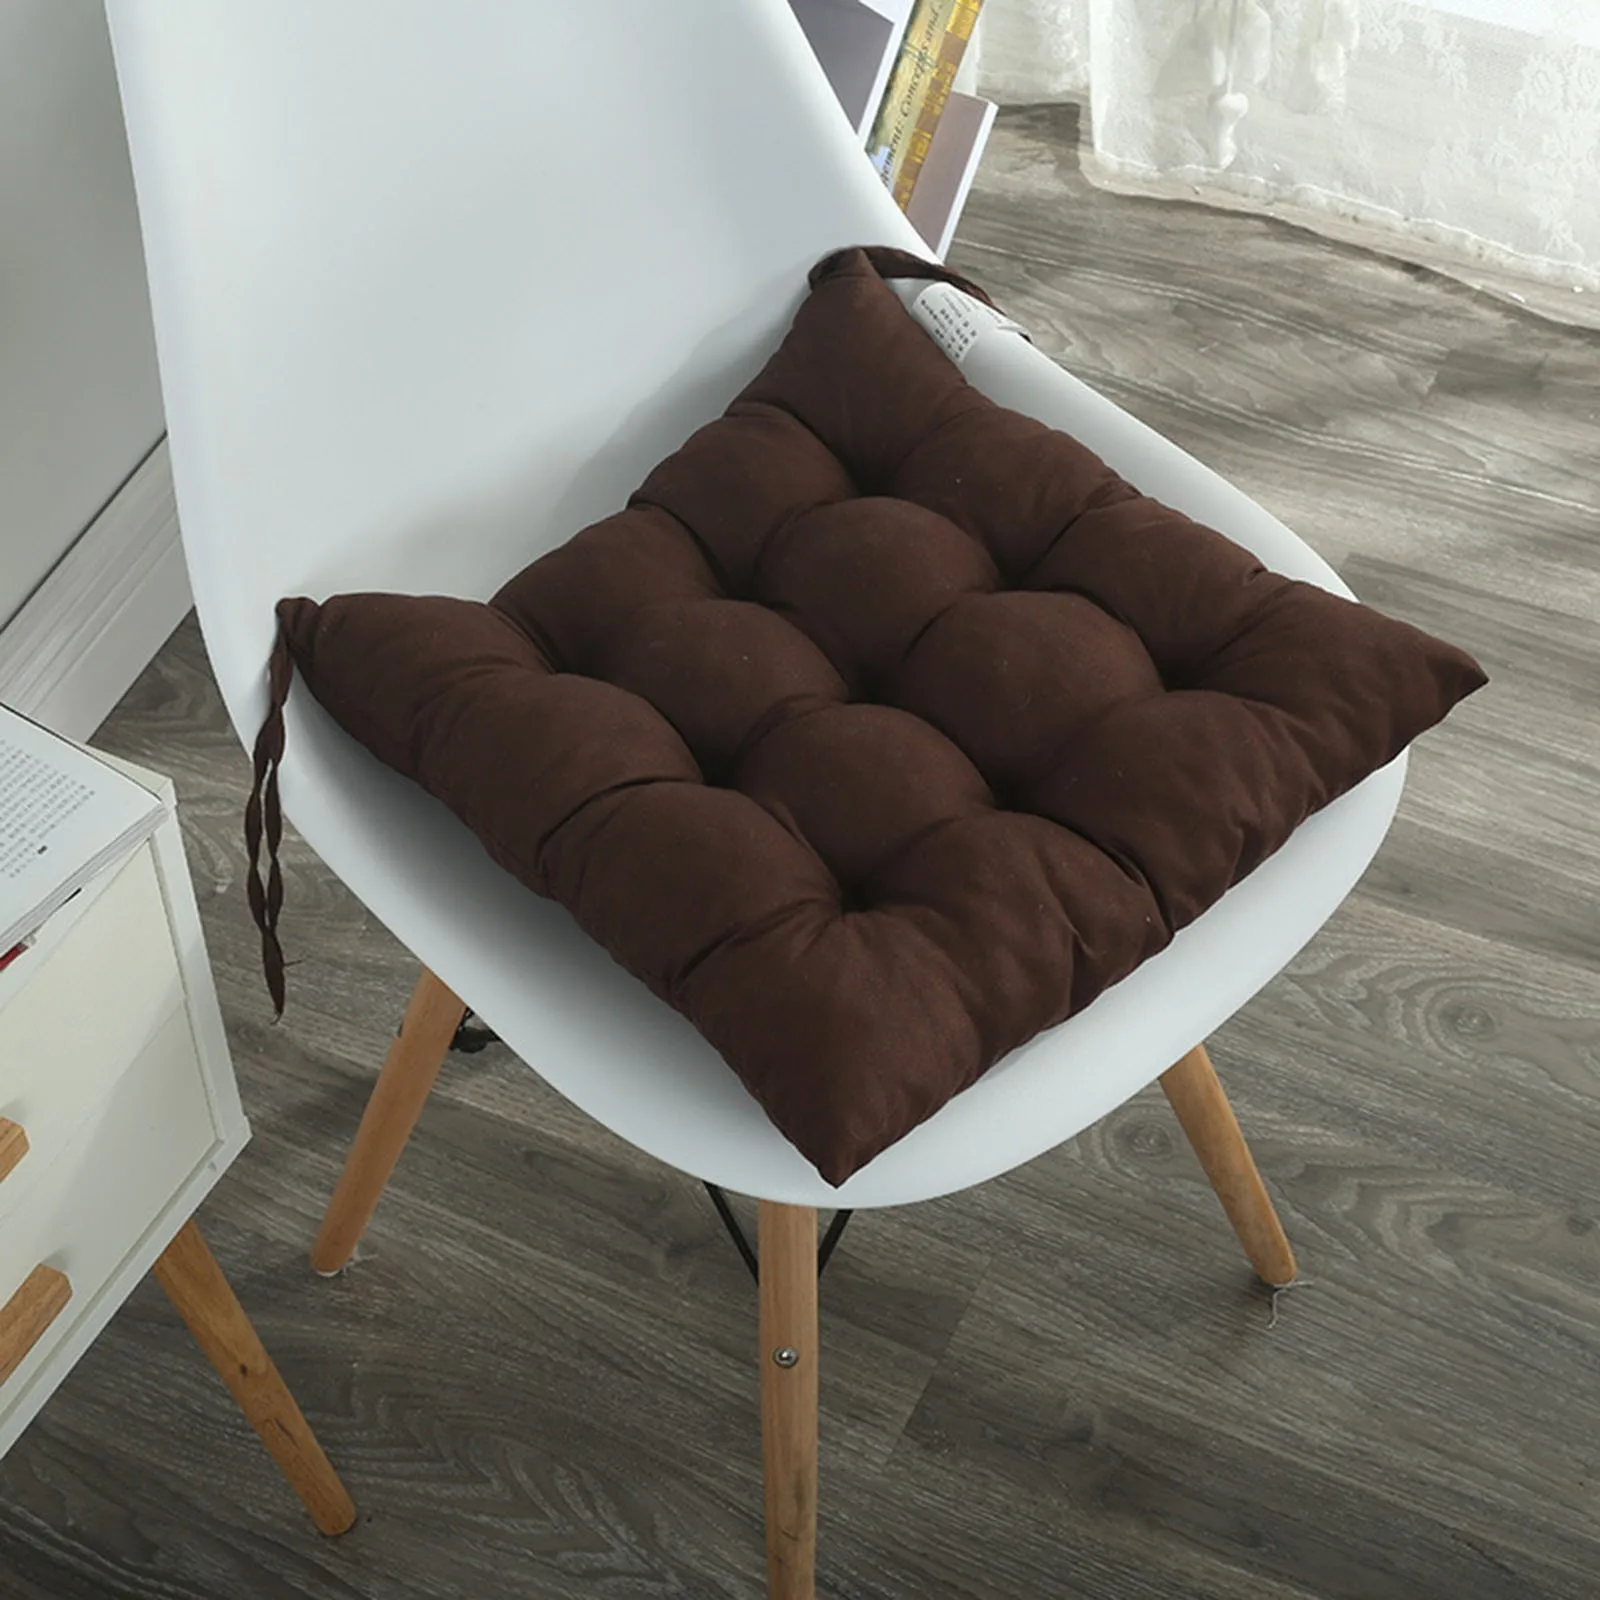 Solid Color Chair Cushion 40x40cm Soft Thicken Pad Chair Cushion Tie on Seat Dining Room Kitchen Office Decor Backrest Pillow